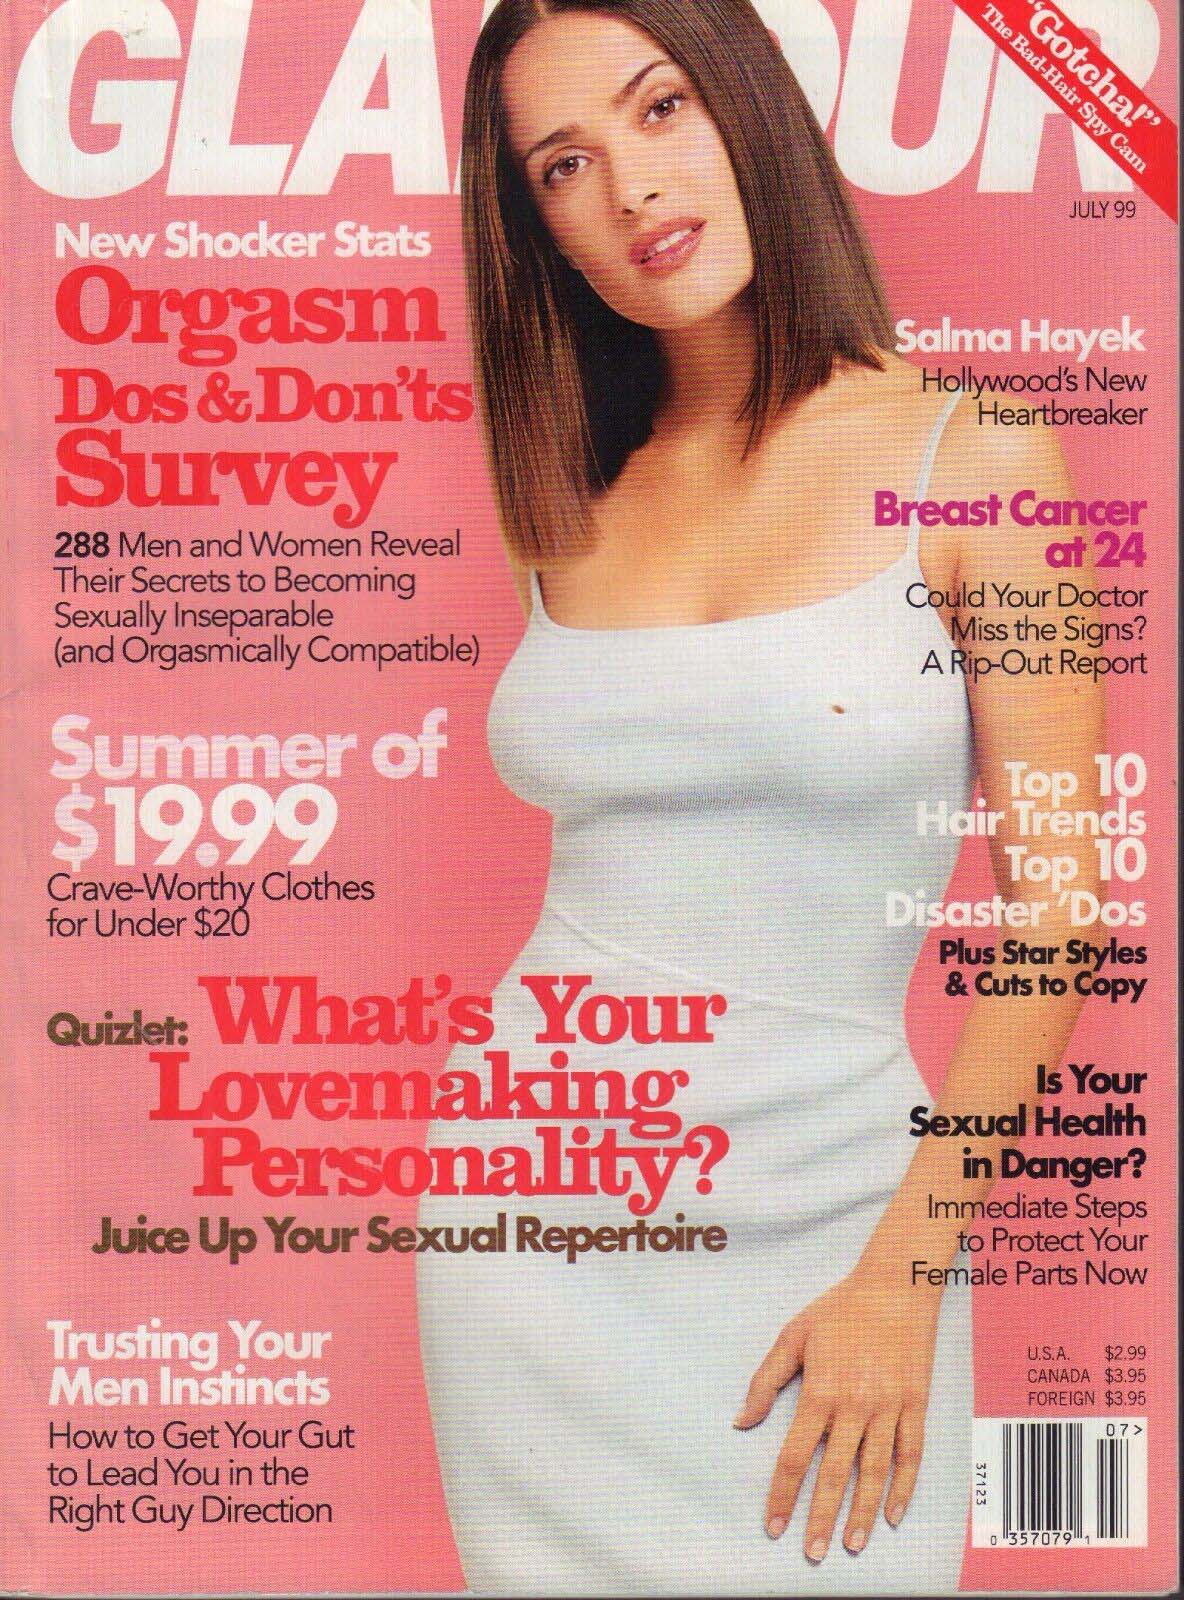 Glamour July 1999 magazine back issue Glamour magizine back copy Glamour July 1999 Womens Magazine Back Issue Published by Conde Nast Publications. New Shocker Stats Orgasm Dos & Don'ts Survey.